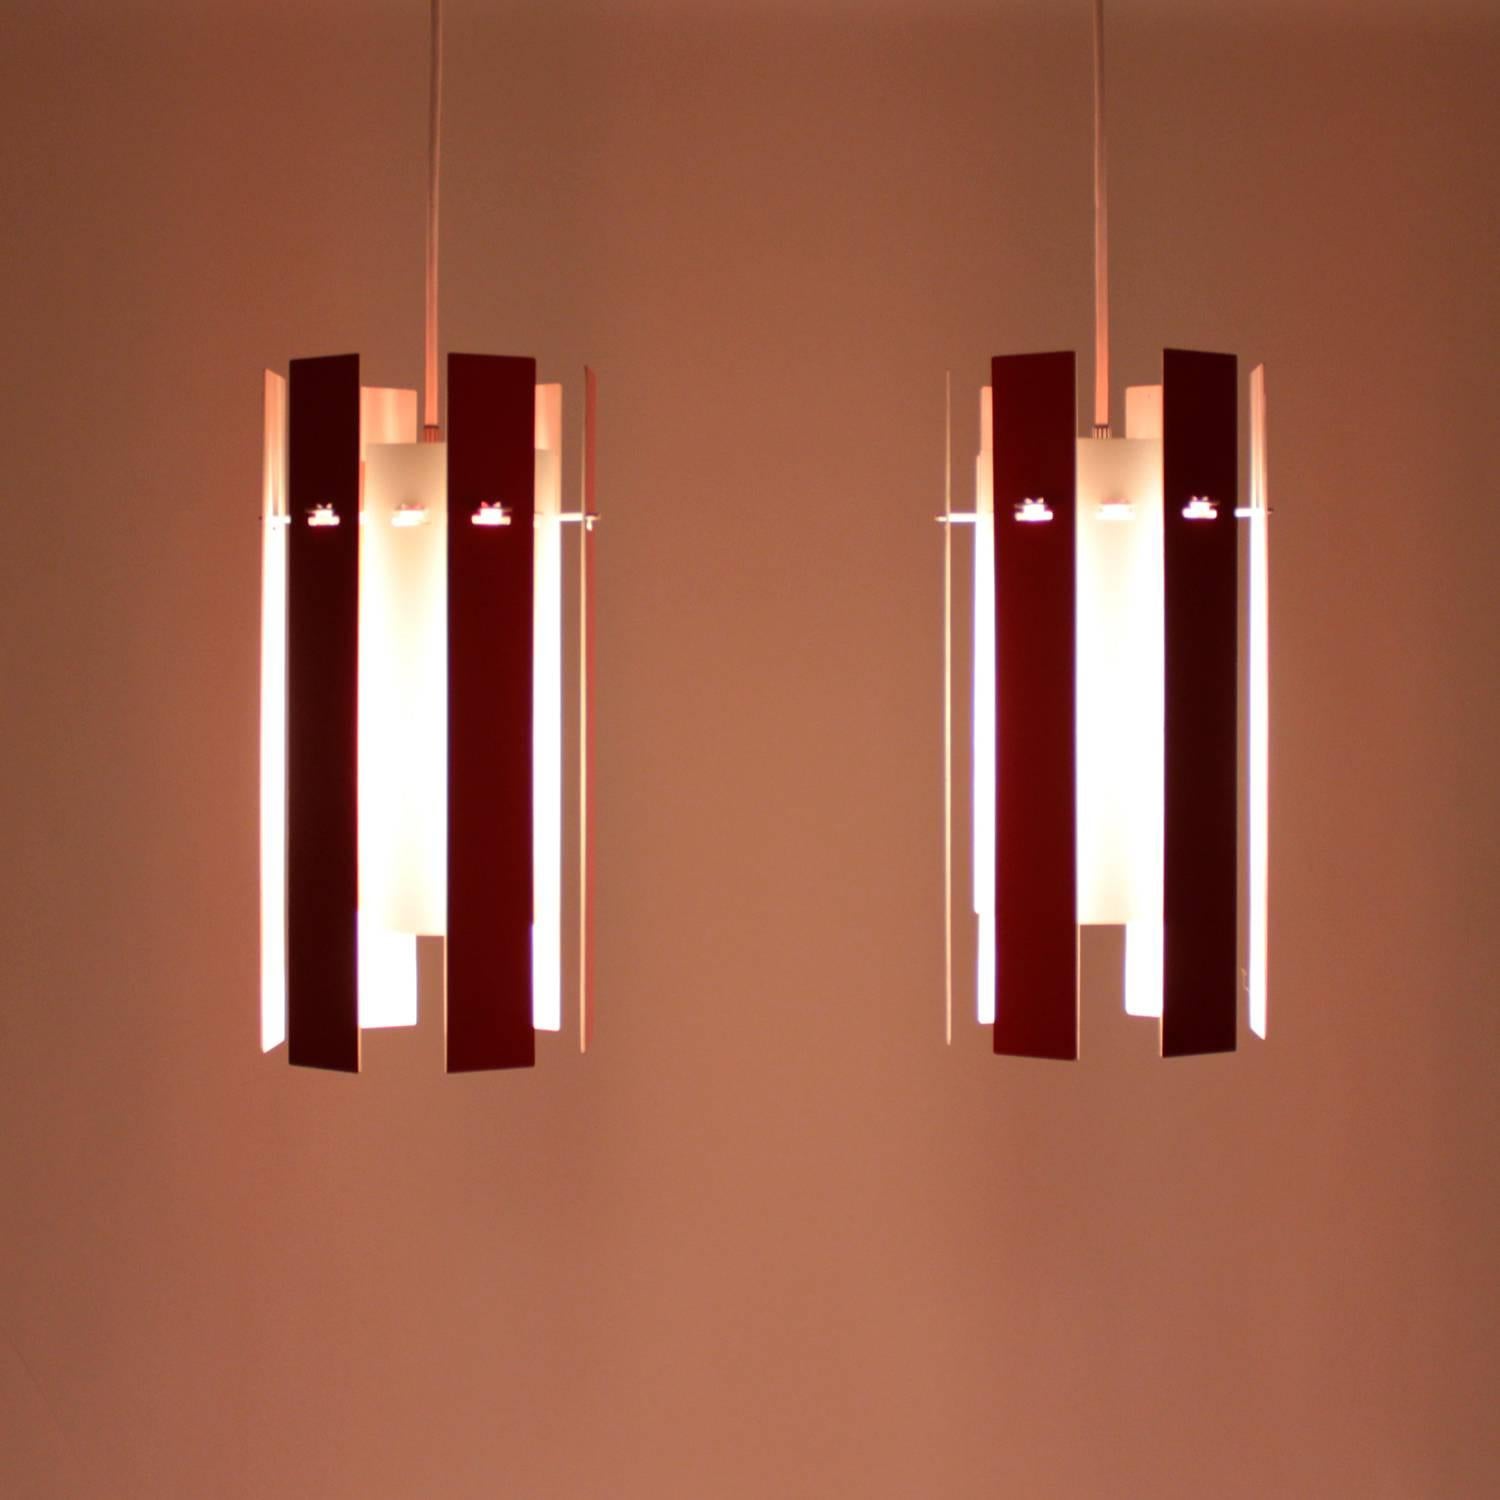 Cocktail pendant pair by Henning Rehhof in 1971 and produced by Fog & Mørup - Rare and very attractive pair of red and white hanging lamps!

The spectacular Cocktail is made up of 12 detachable aluminum strips in two different lengths. Painted red